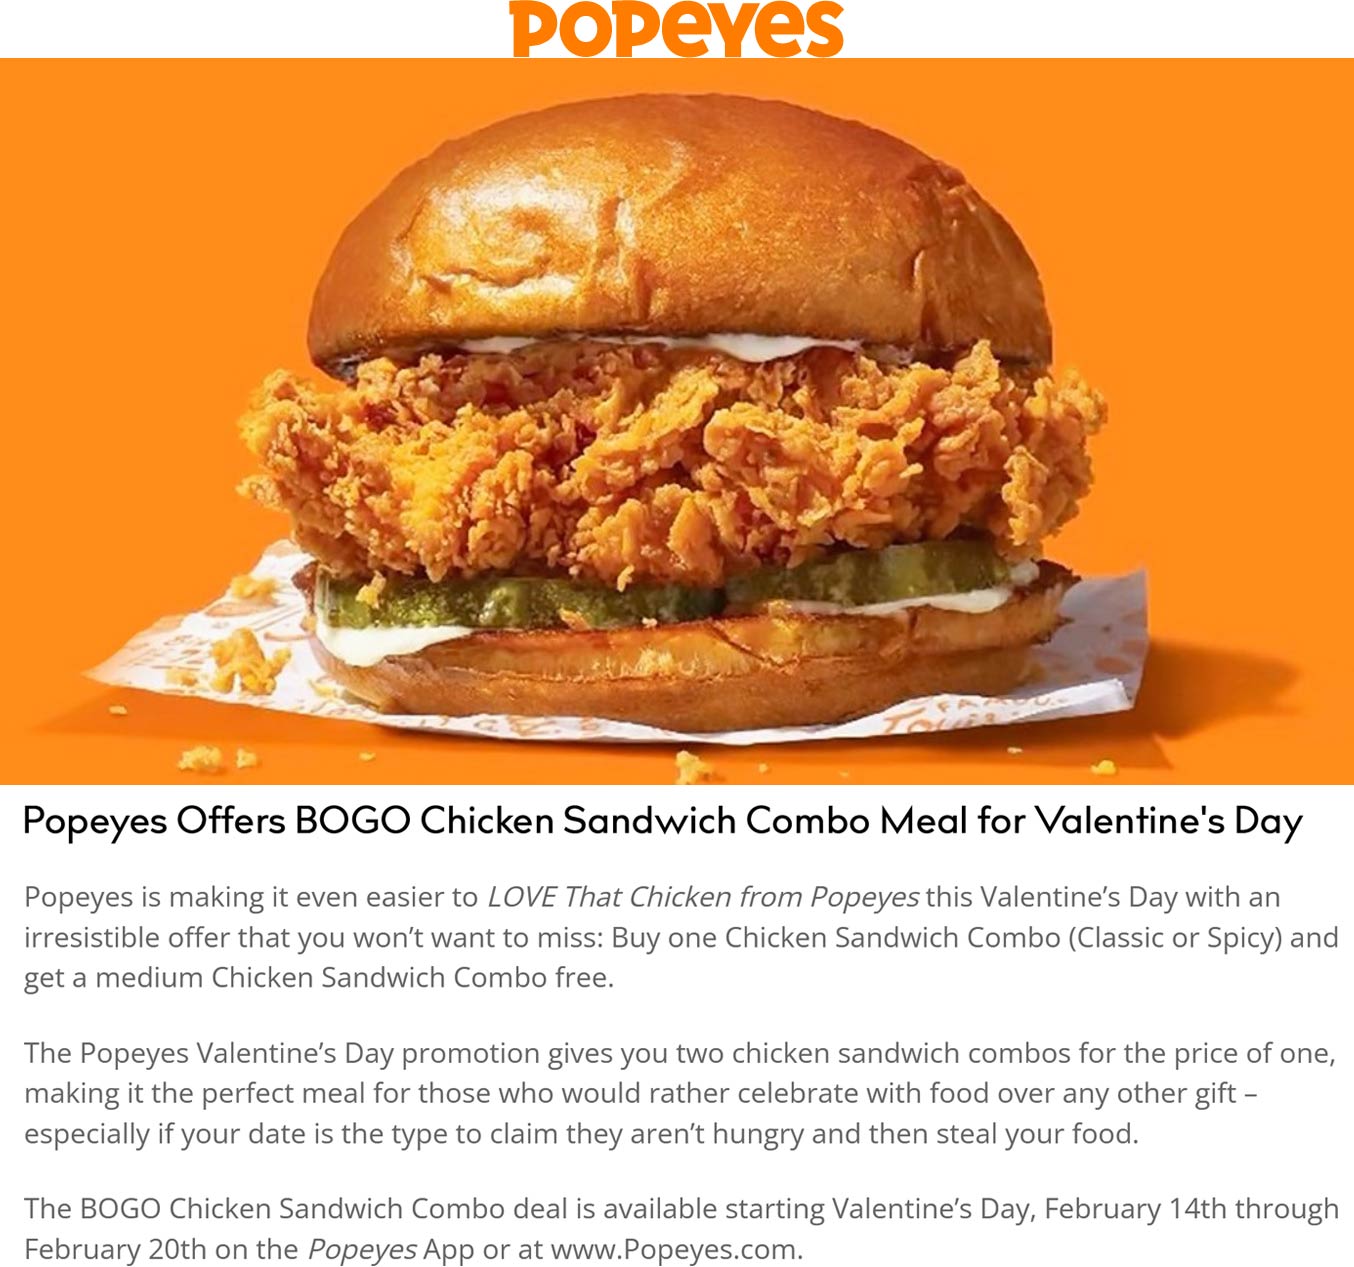 Popeyes coupons & promo code for [December 2022]